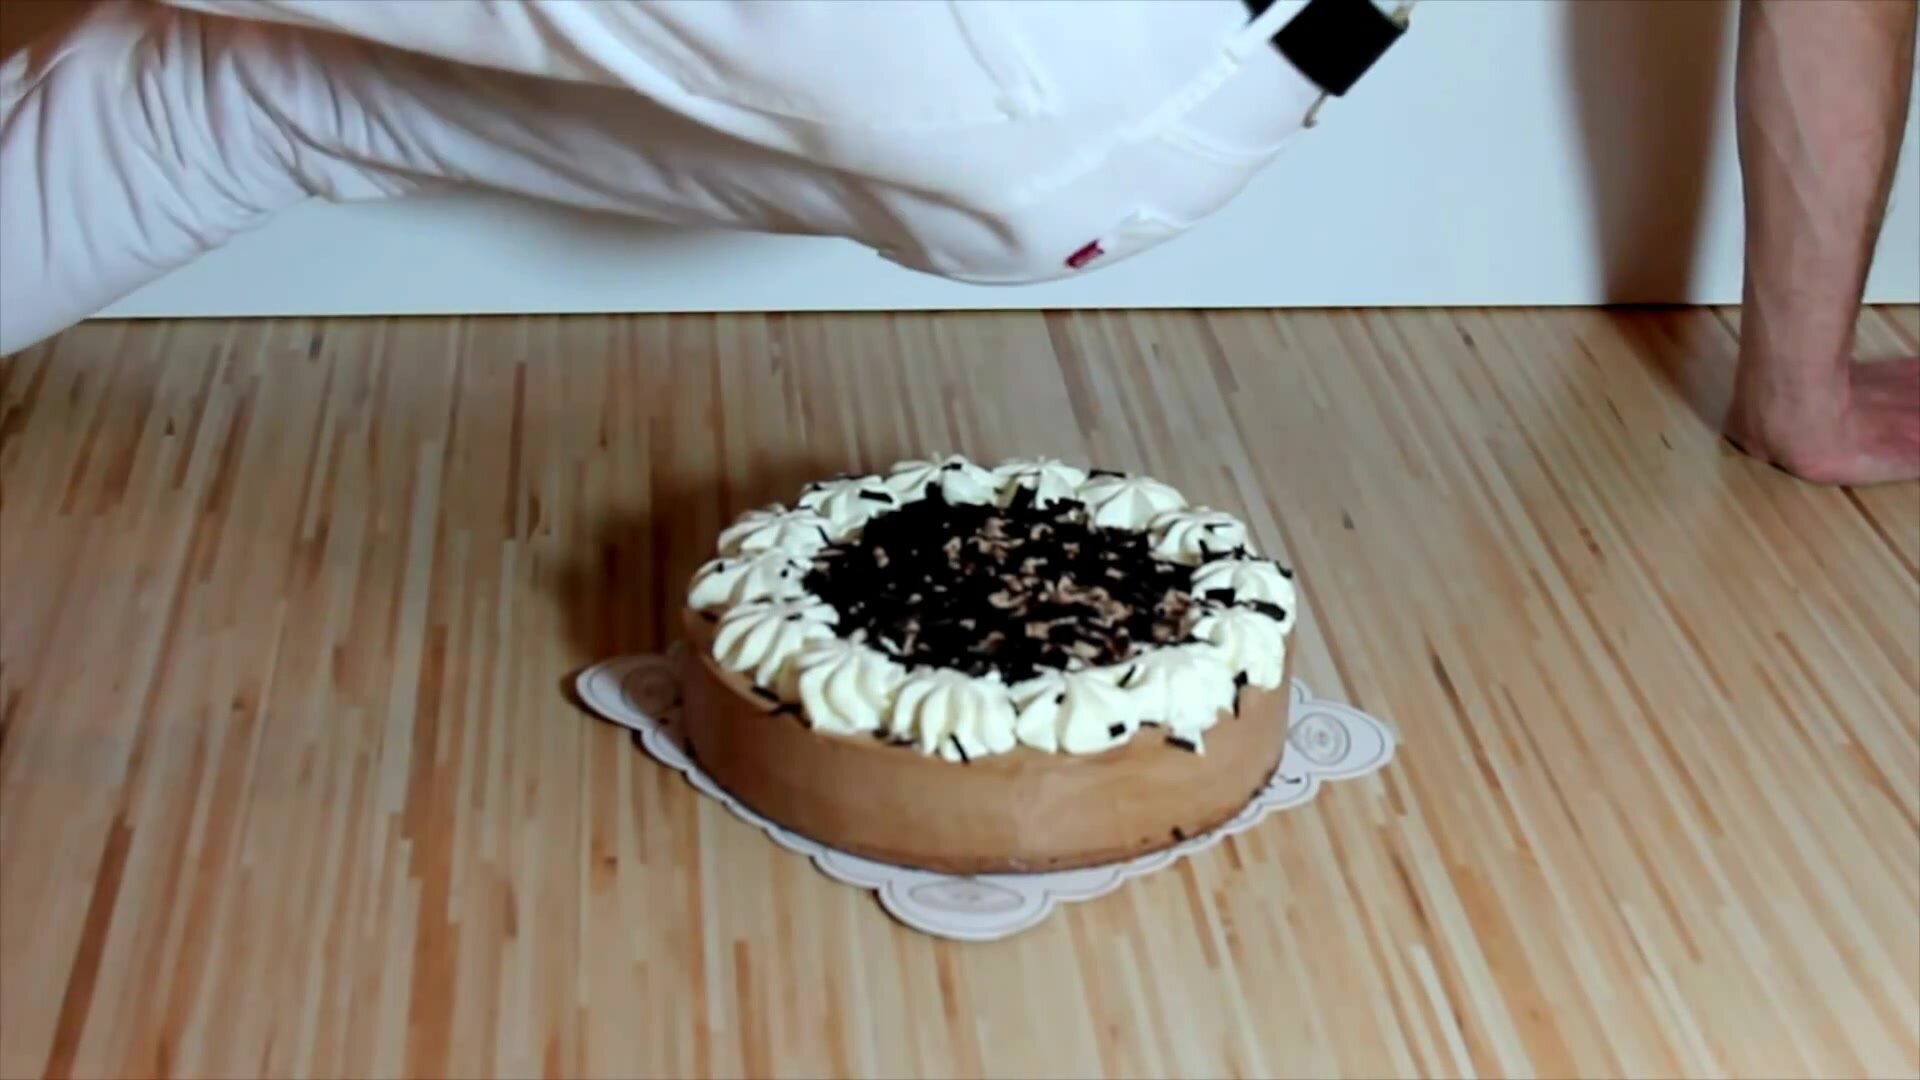 Guy in white jeans sits on creamy gateau and gets messy